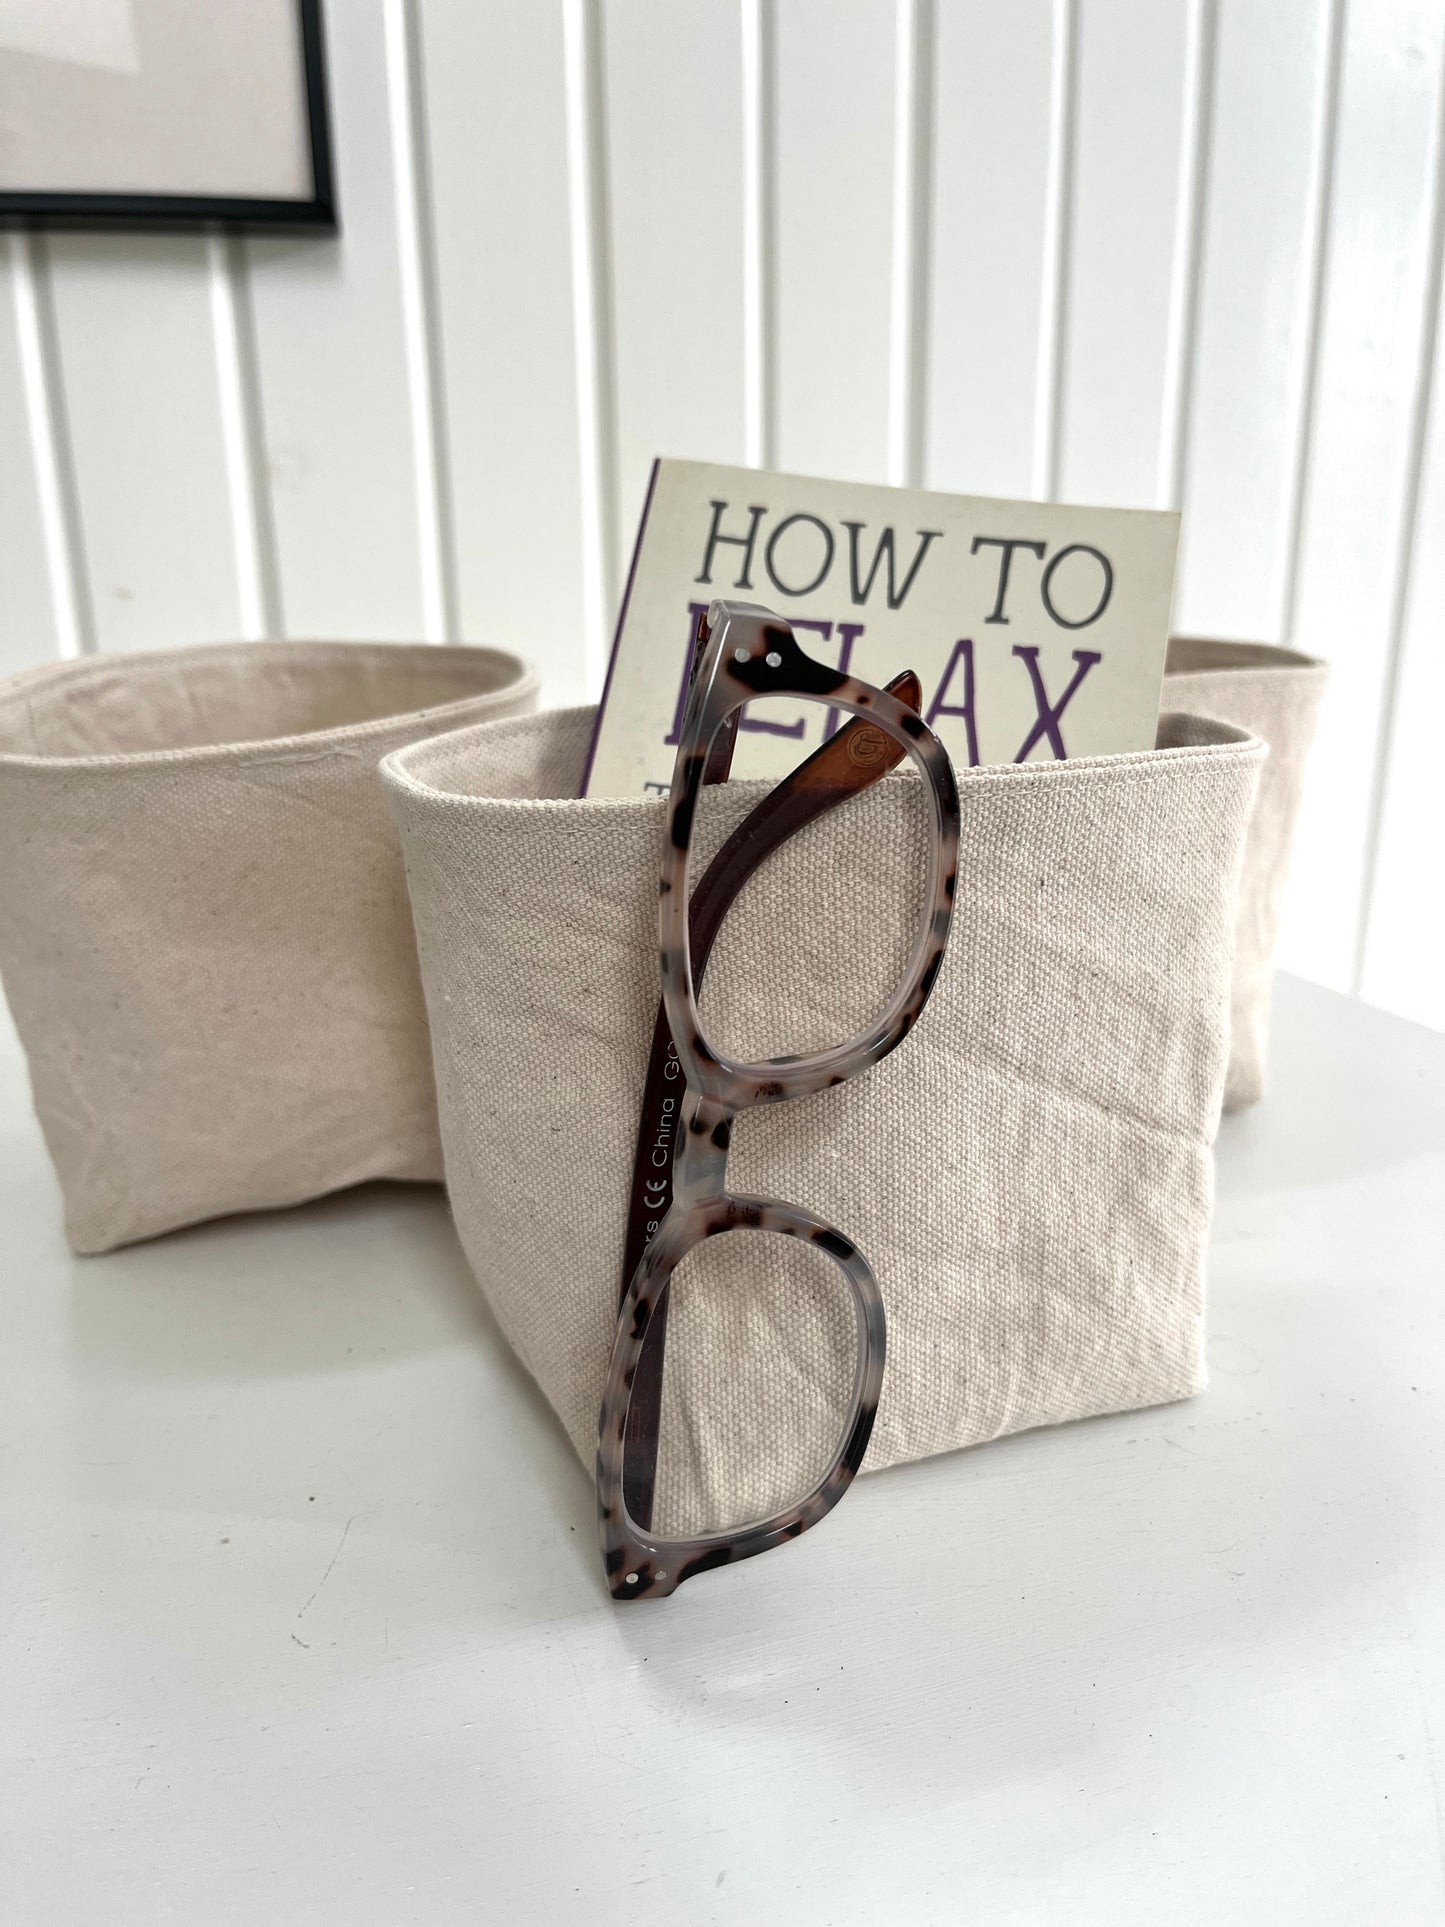 The small bucket sits on a white dresser. Inside it is a small book titled "How to Relax". A pair of reading glasses hangs from the front of the bucket. Two additional buckets sit in the background.